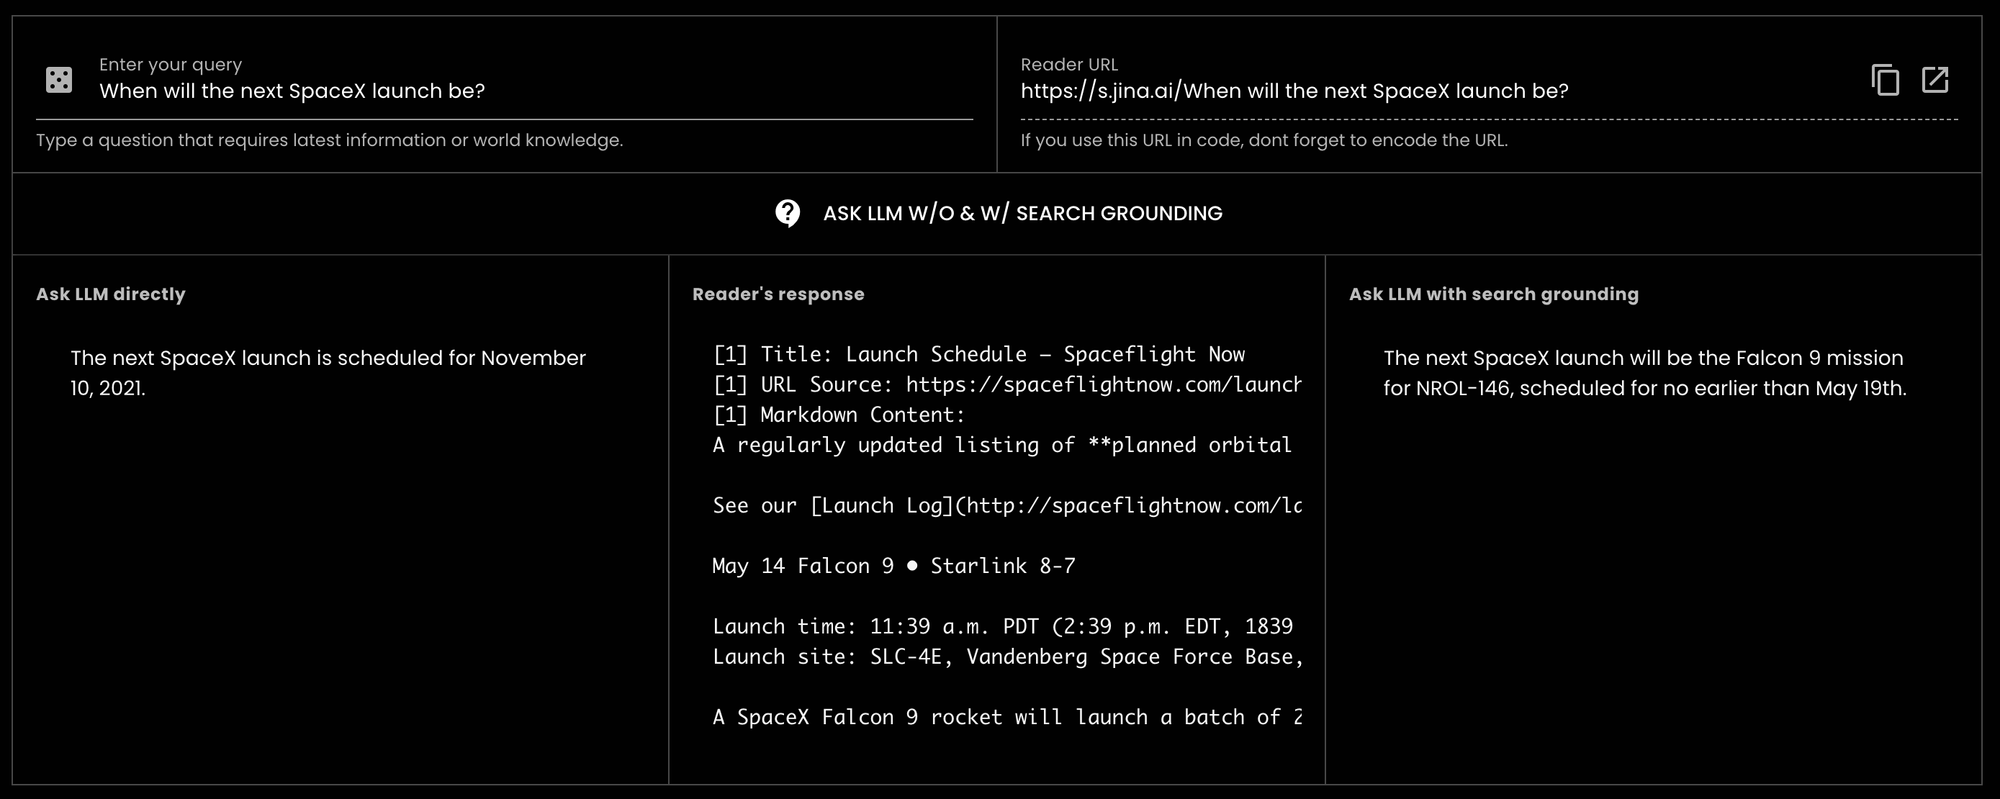 Screen interface for inquiring about SpaceX launches with a query field and details about upcoming missions.